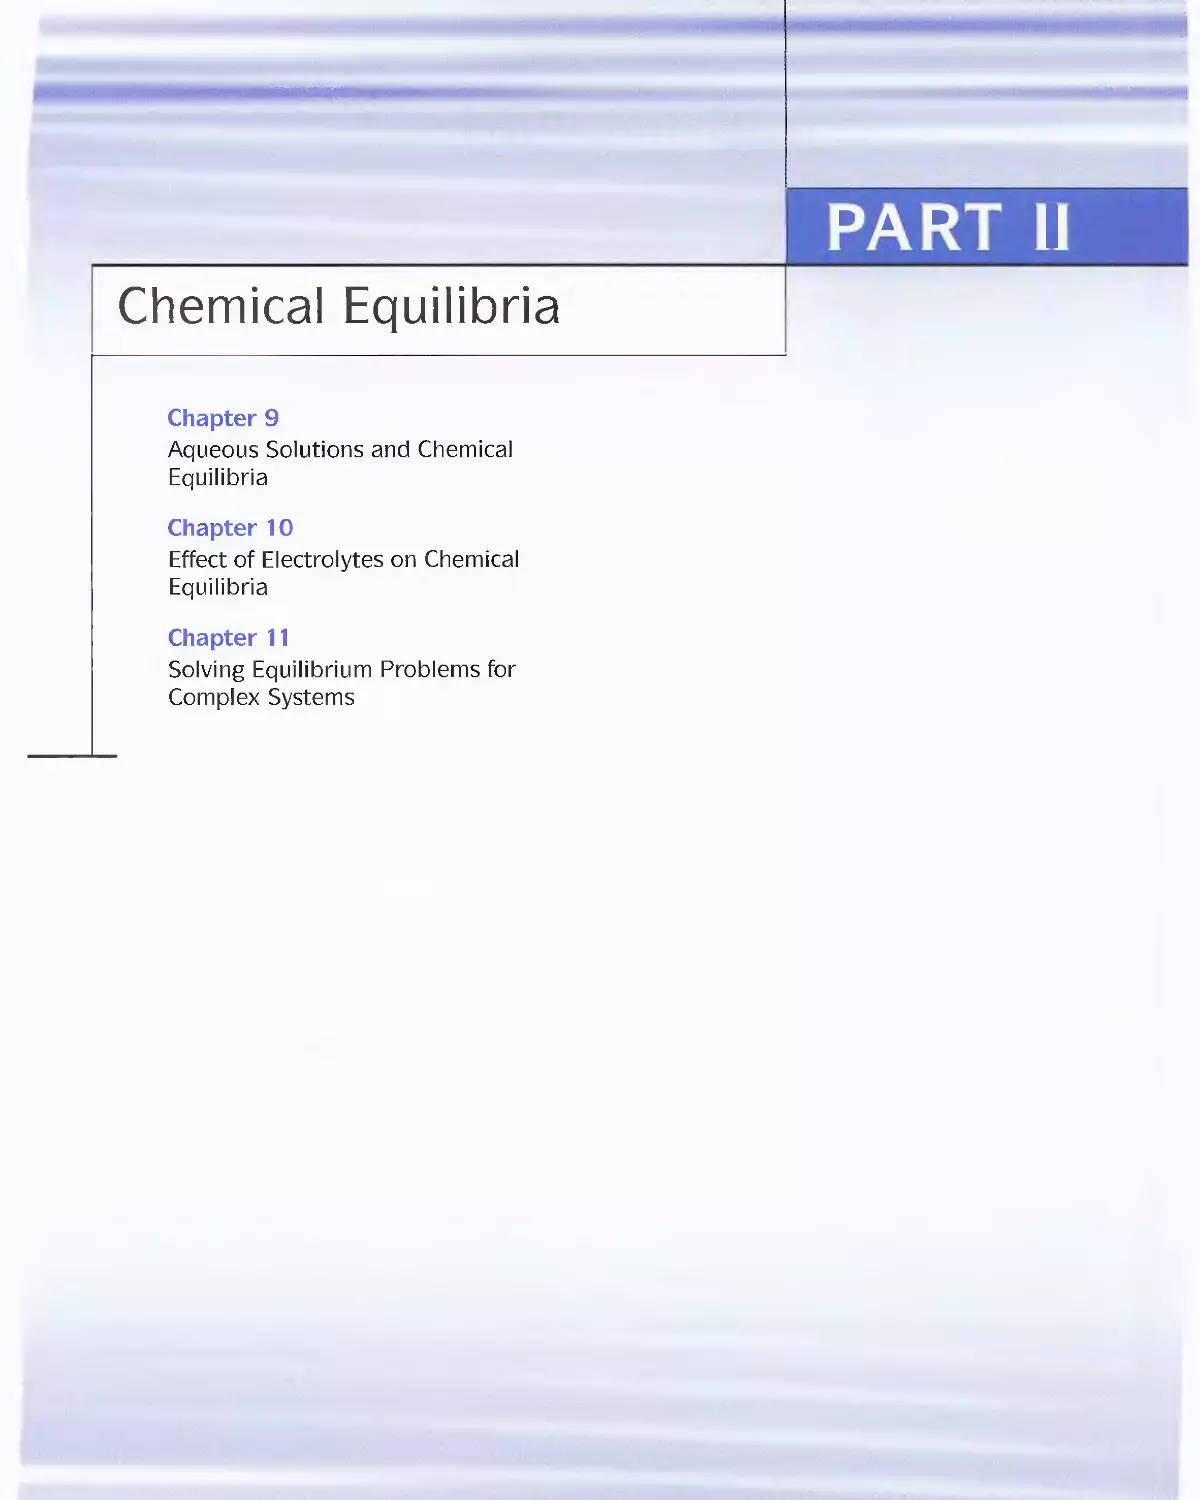 Part 2 - Chemical Equilibria